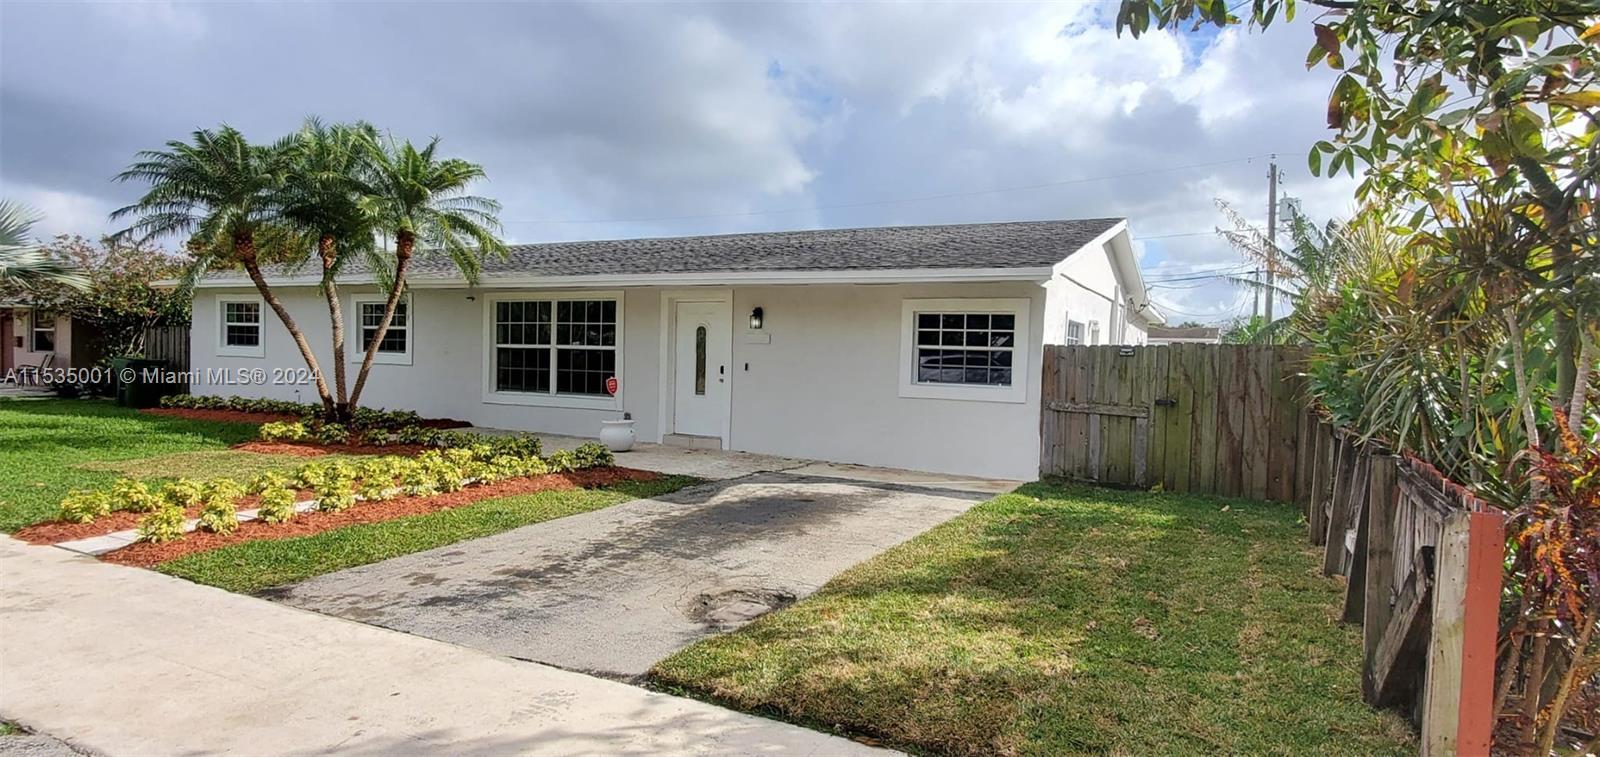 Photo of 710 NW 17th Ct in Homestead, FL